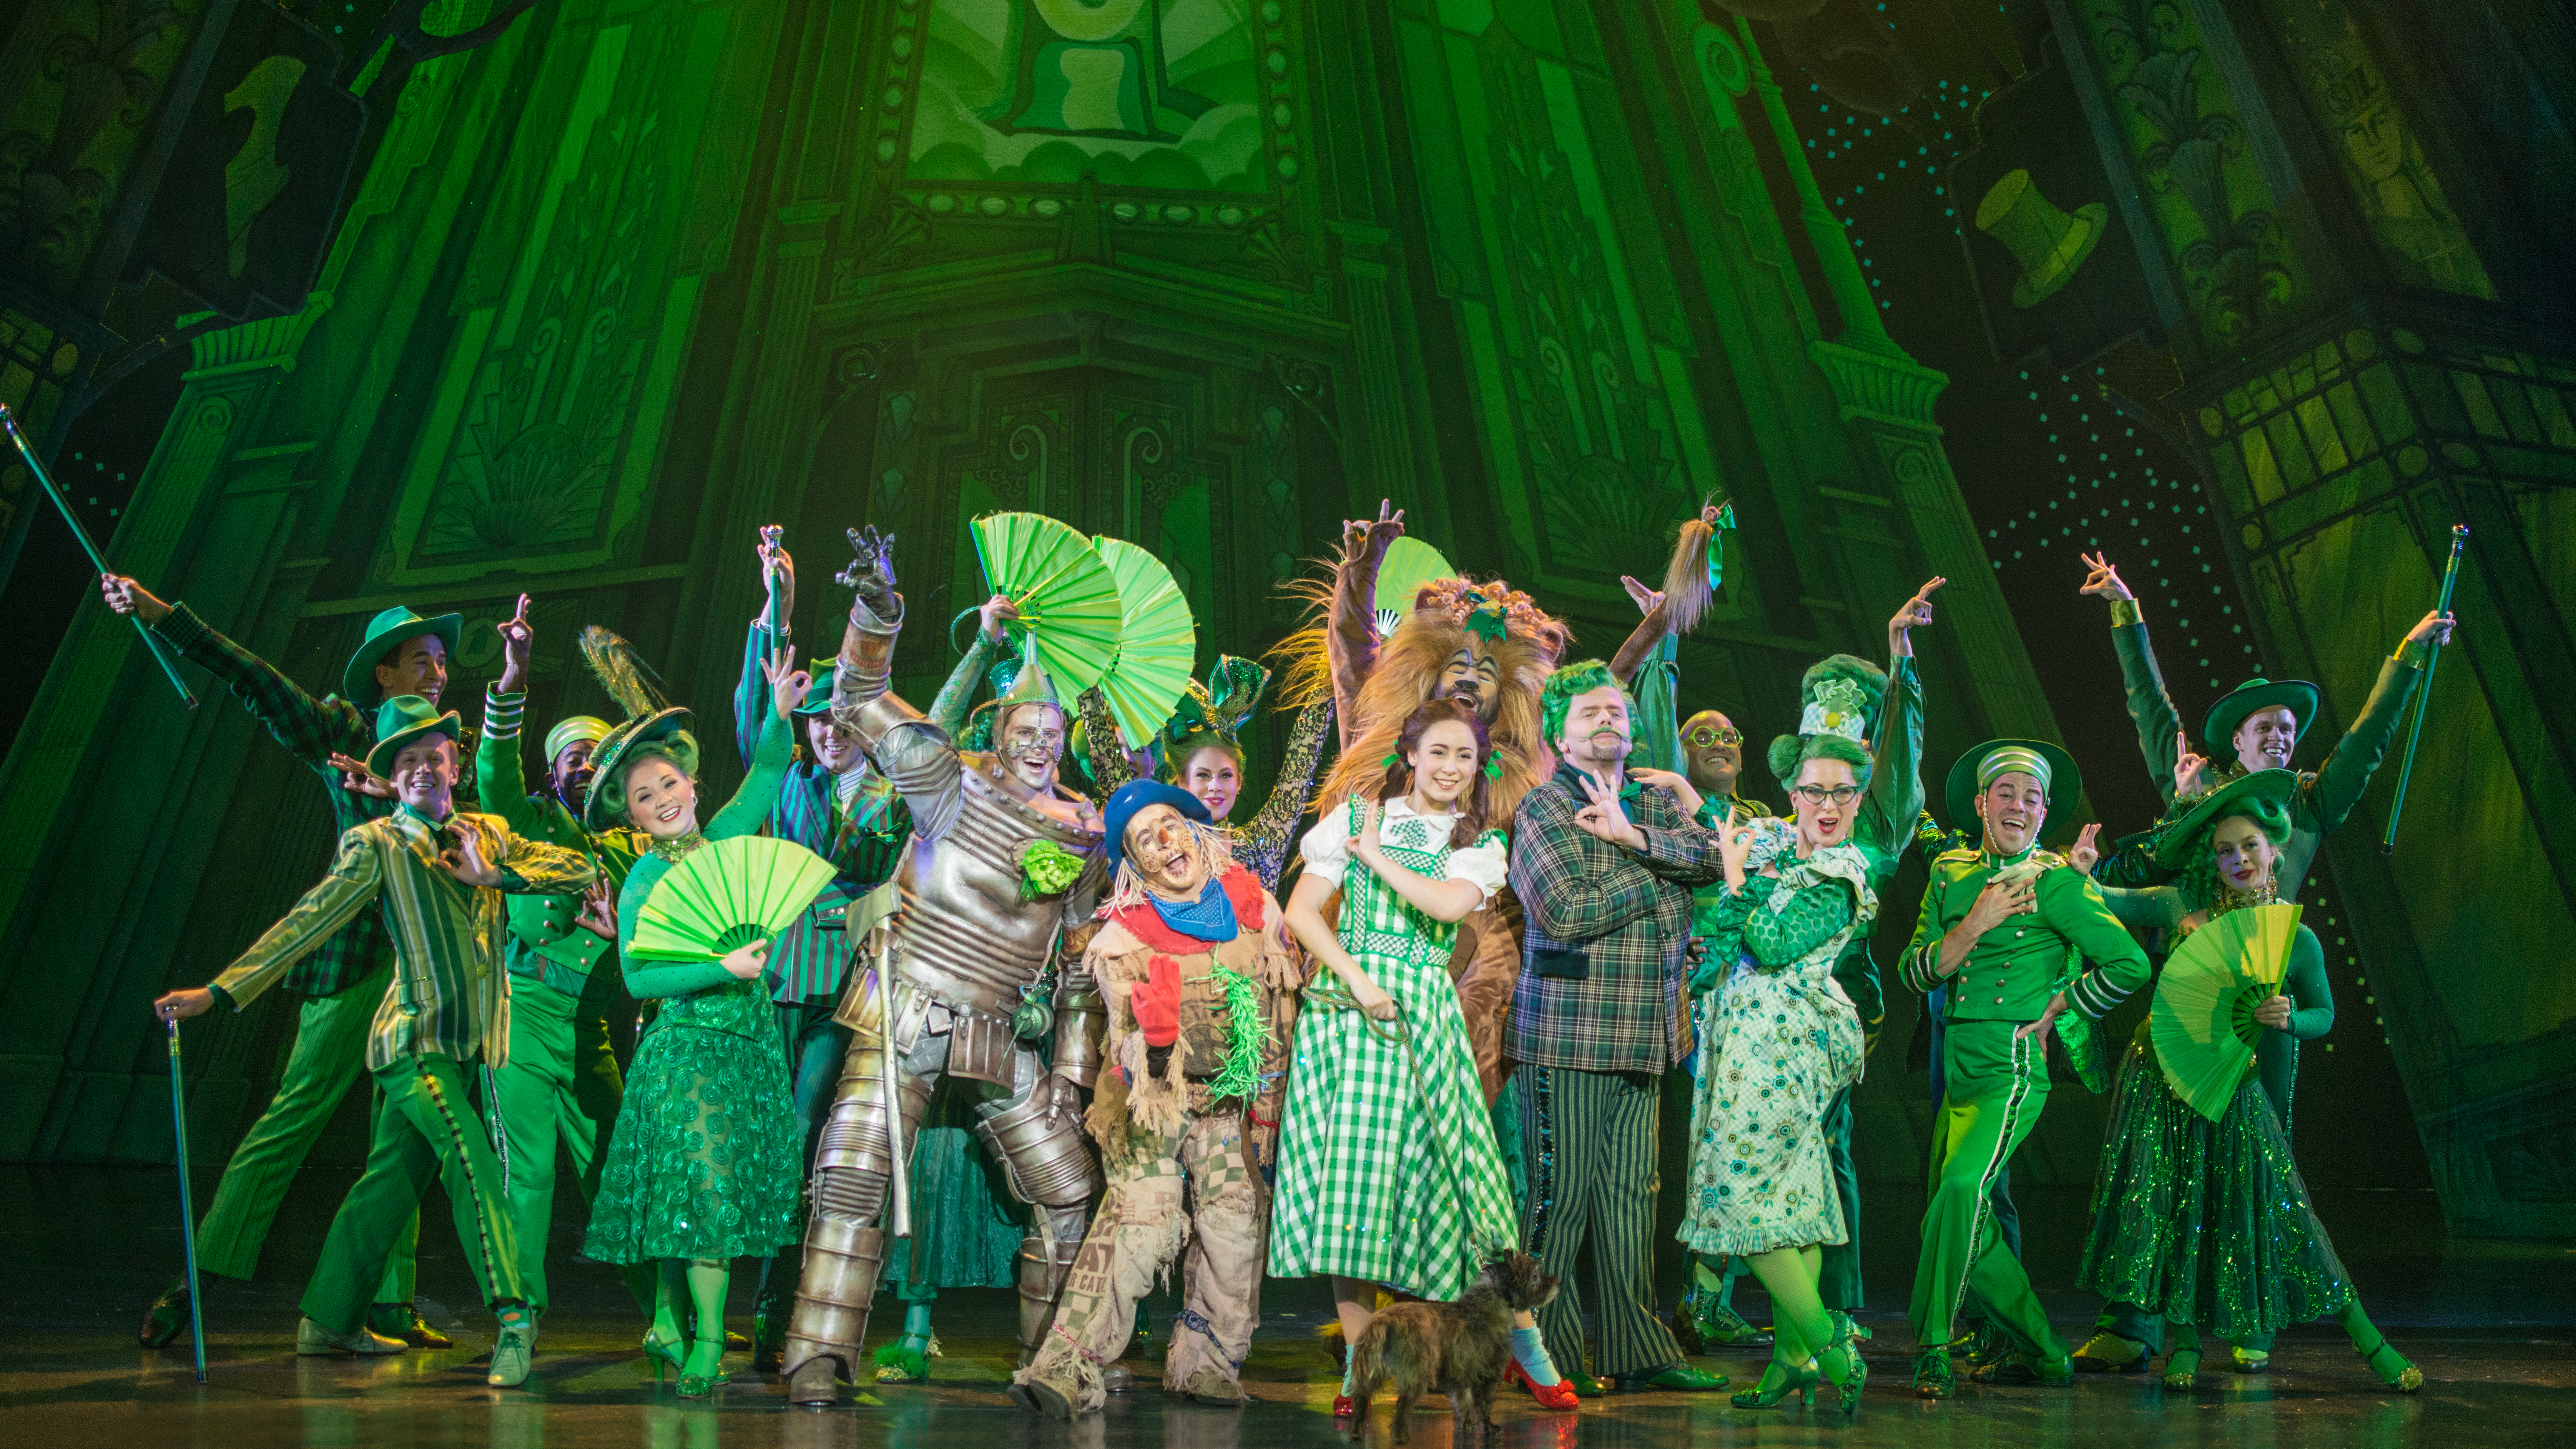 The company of "The Wizard of Oz" performs “Merry Old Land of Oz” in "The Wizard of Oz" at the National Theatre. (Daniel A. Swalec)